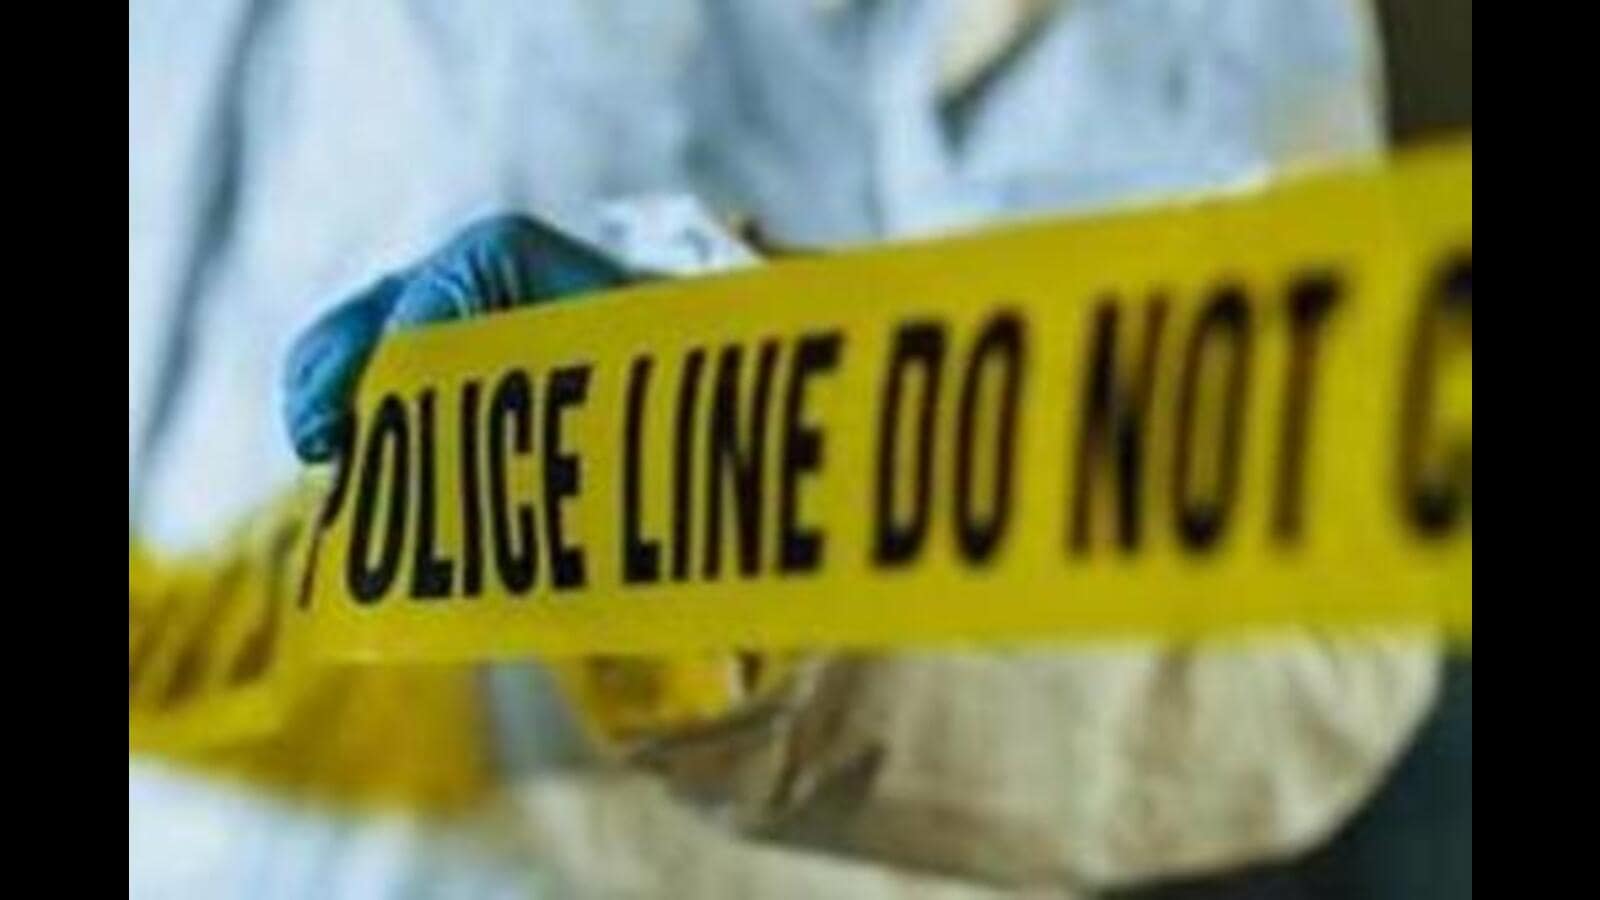 5 held for kidnap, attempt to murder of auto driver in Pune